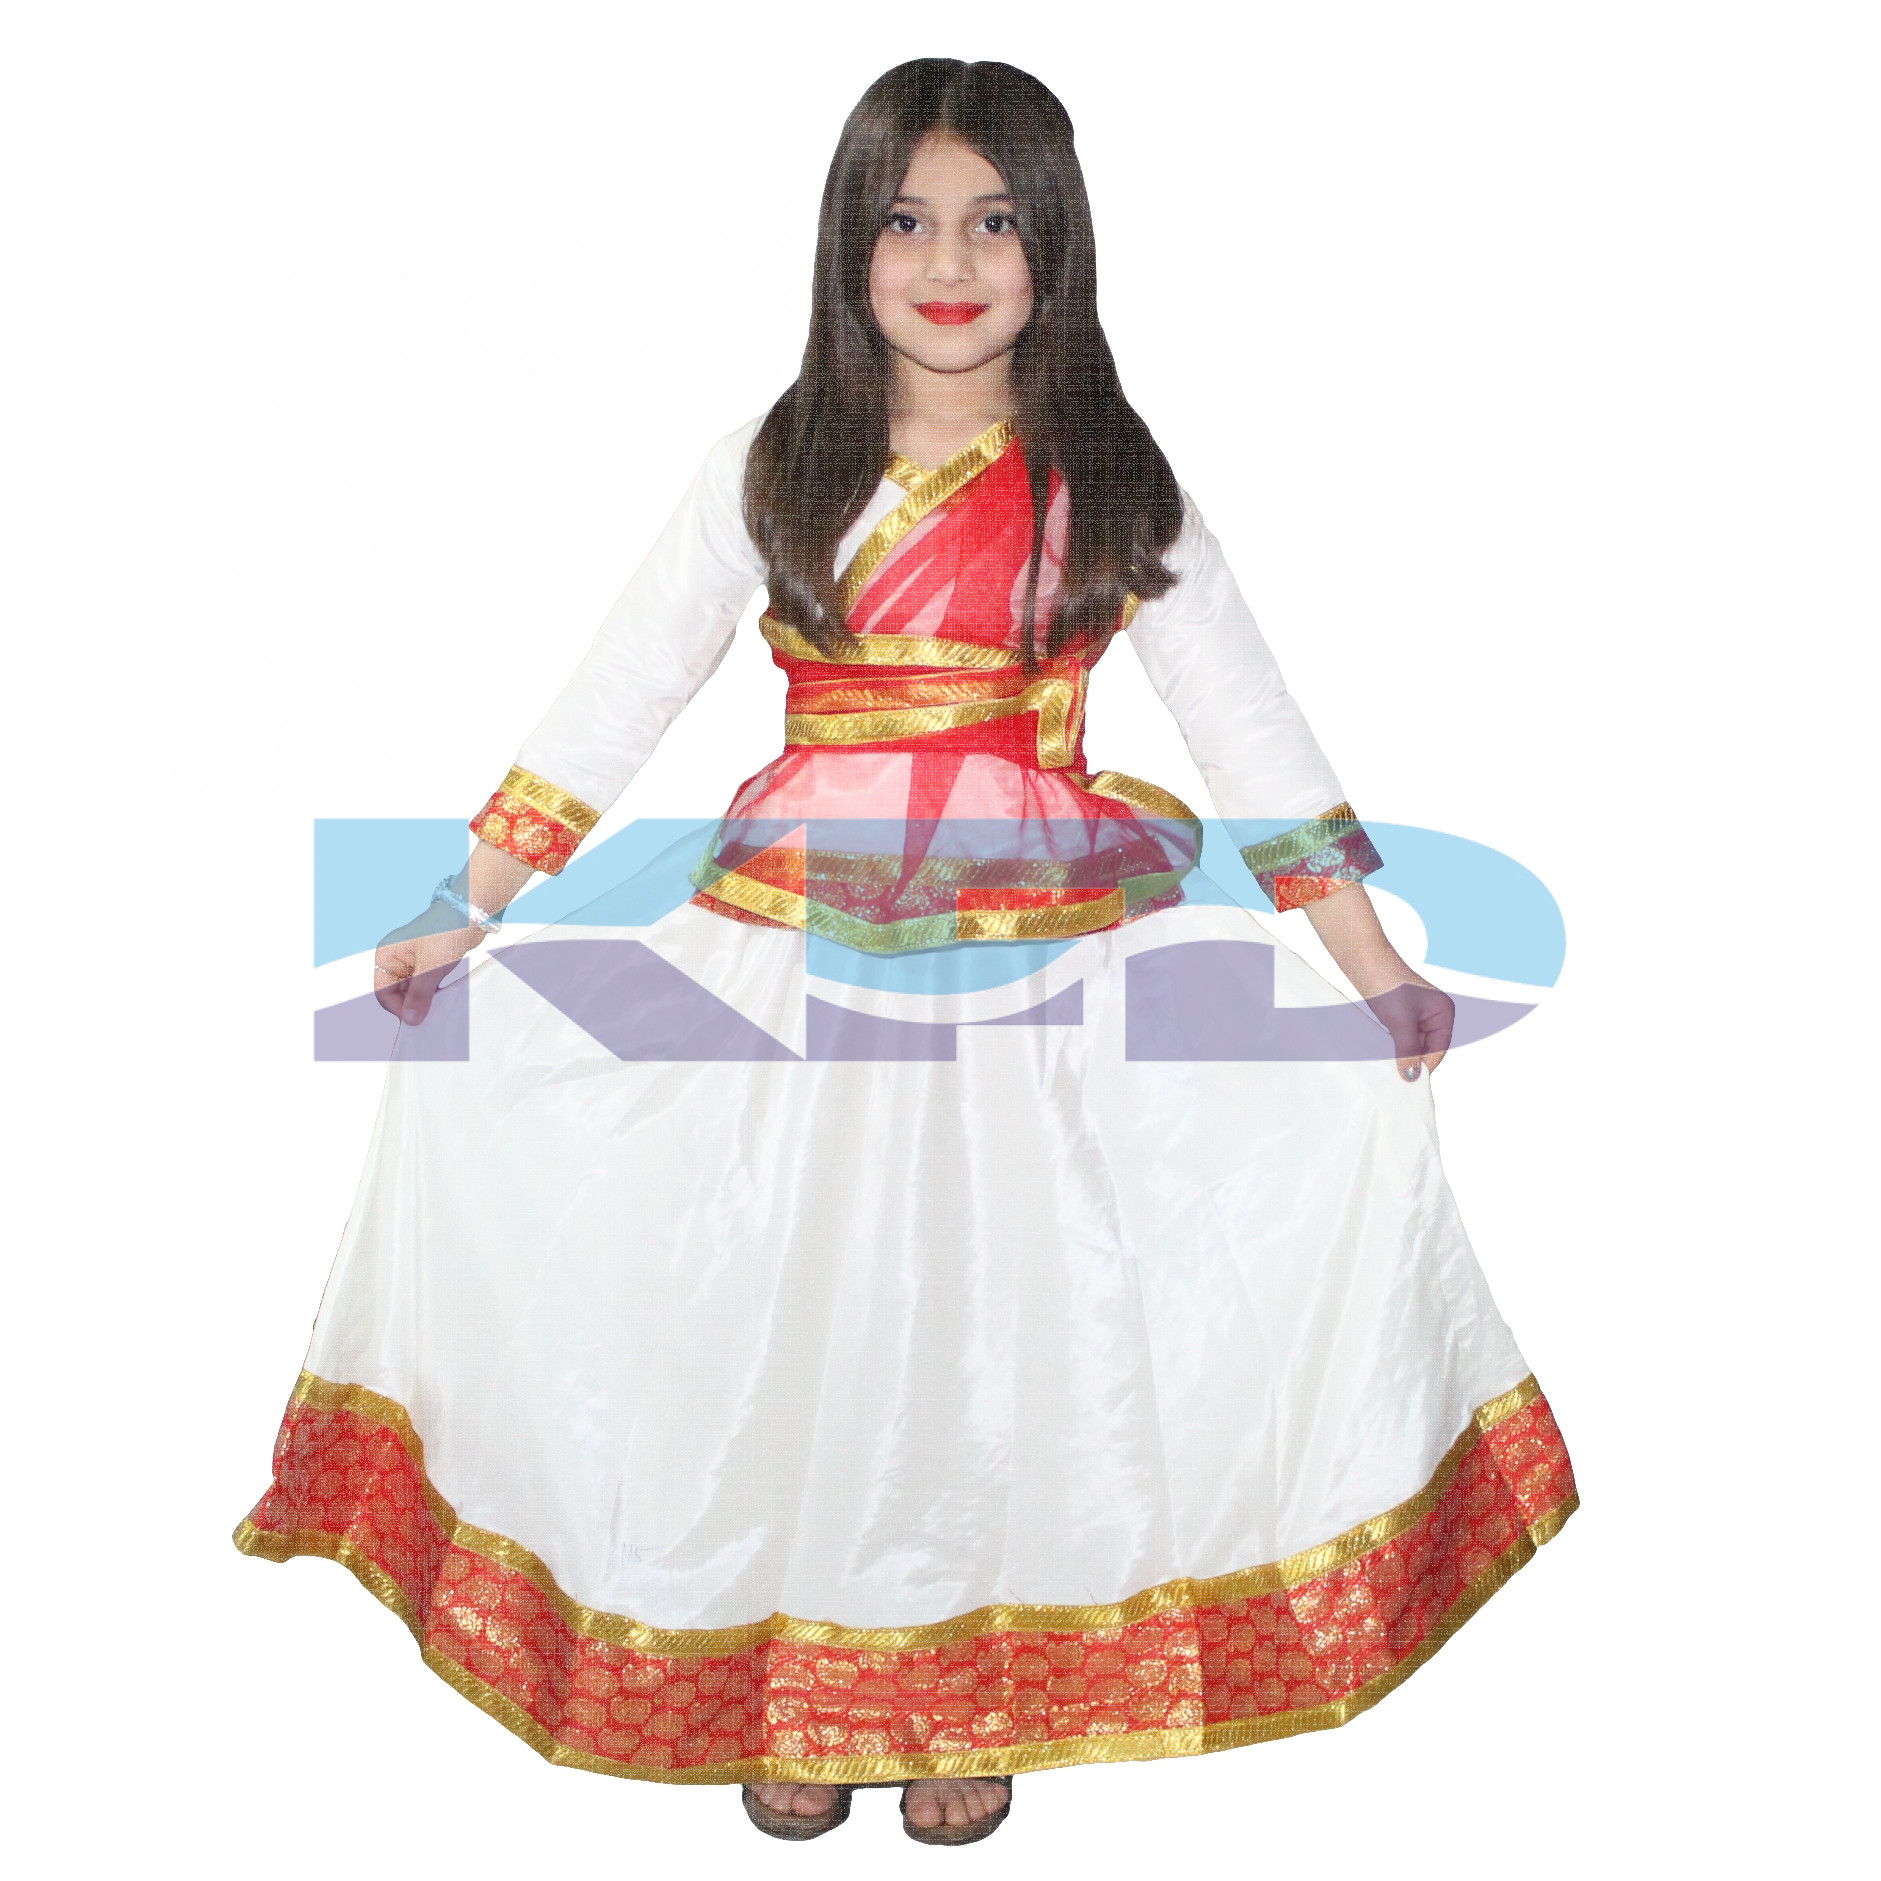 Buy Kkalakriti Kathak Girls White Color Classical Dance Fancy Dress Costume  (4-6 yrs) Online at Low Prices in India - Amazon.in